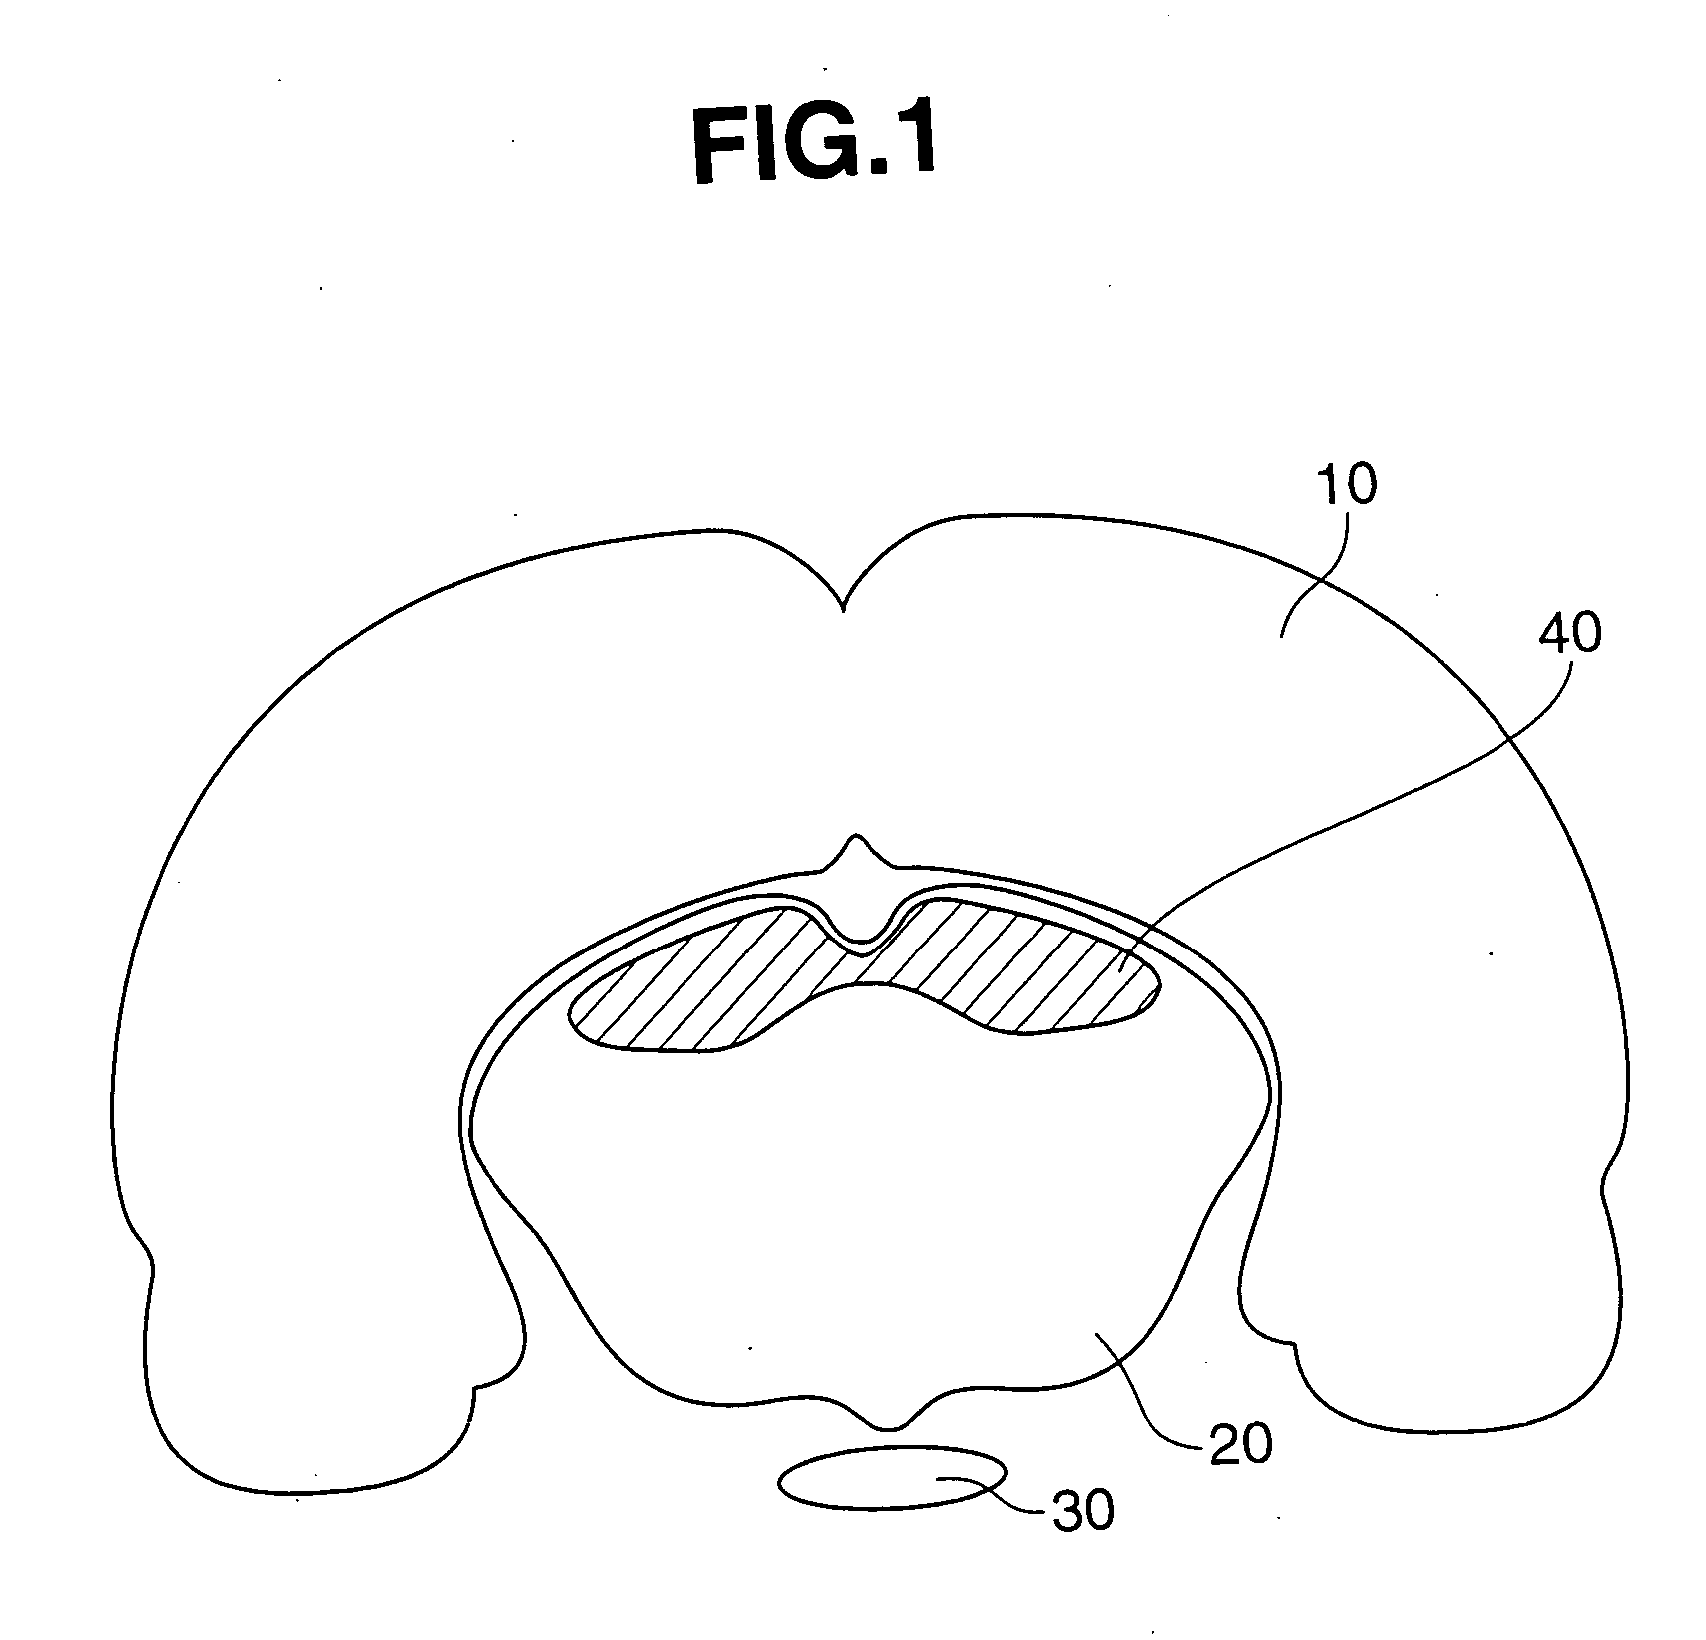 Rodent with urinary disturbance and method of constructing the same, and method of screening remedy for urinary disturbance using the rodent